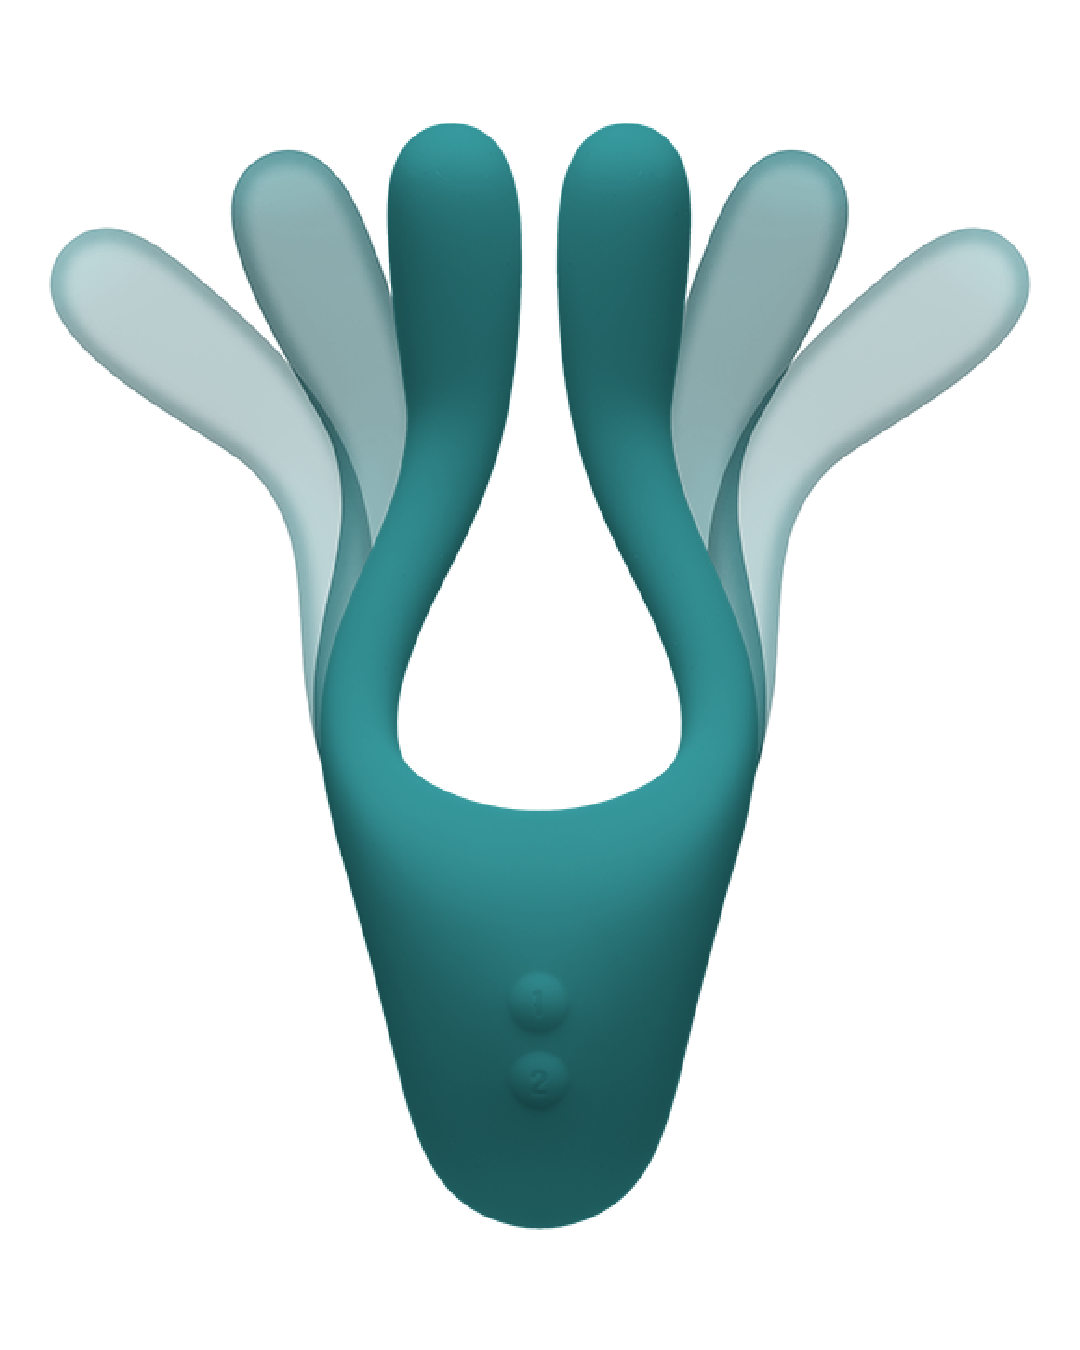 Tryst V2 Bendable Multi Purpose Vibrator with Remote  - Teal shown with the arms in various positions to show its flexibility